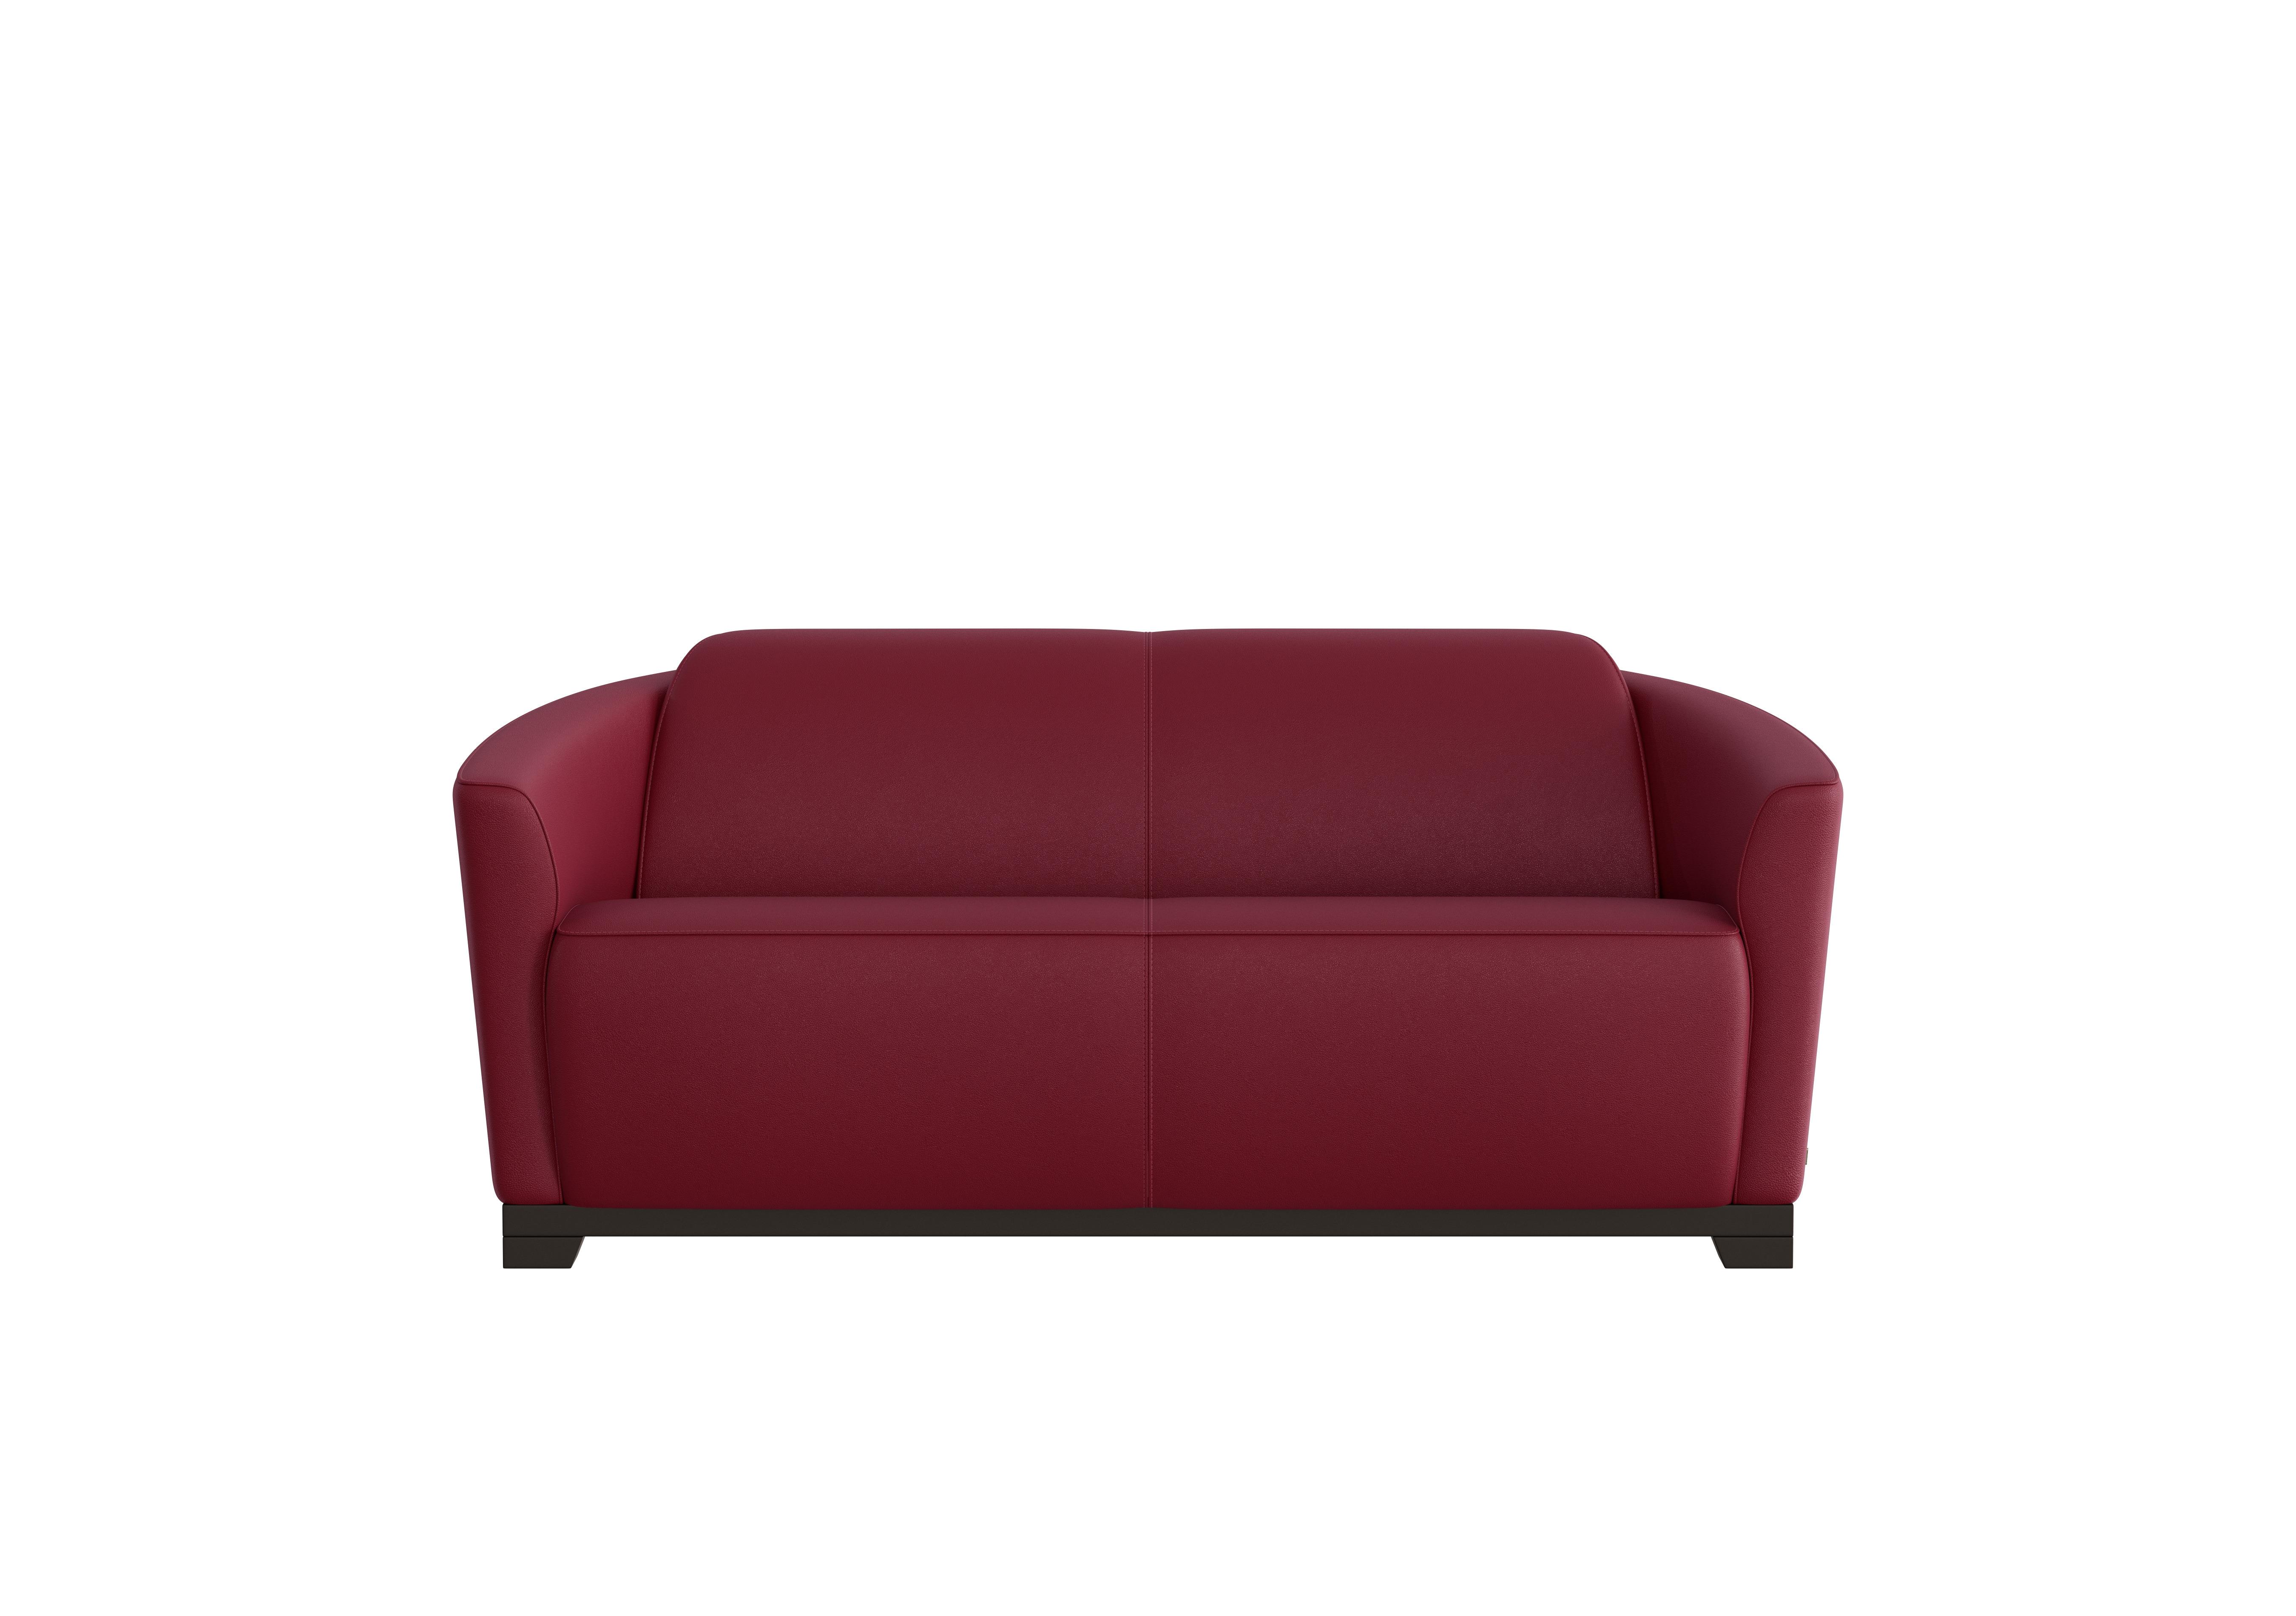 Ketty 2.5 Seater Leather Sofa in Dali Bordeaux 1521 on Furniture Village